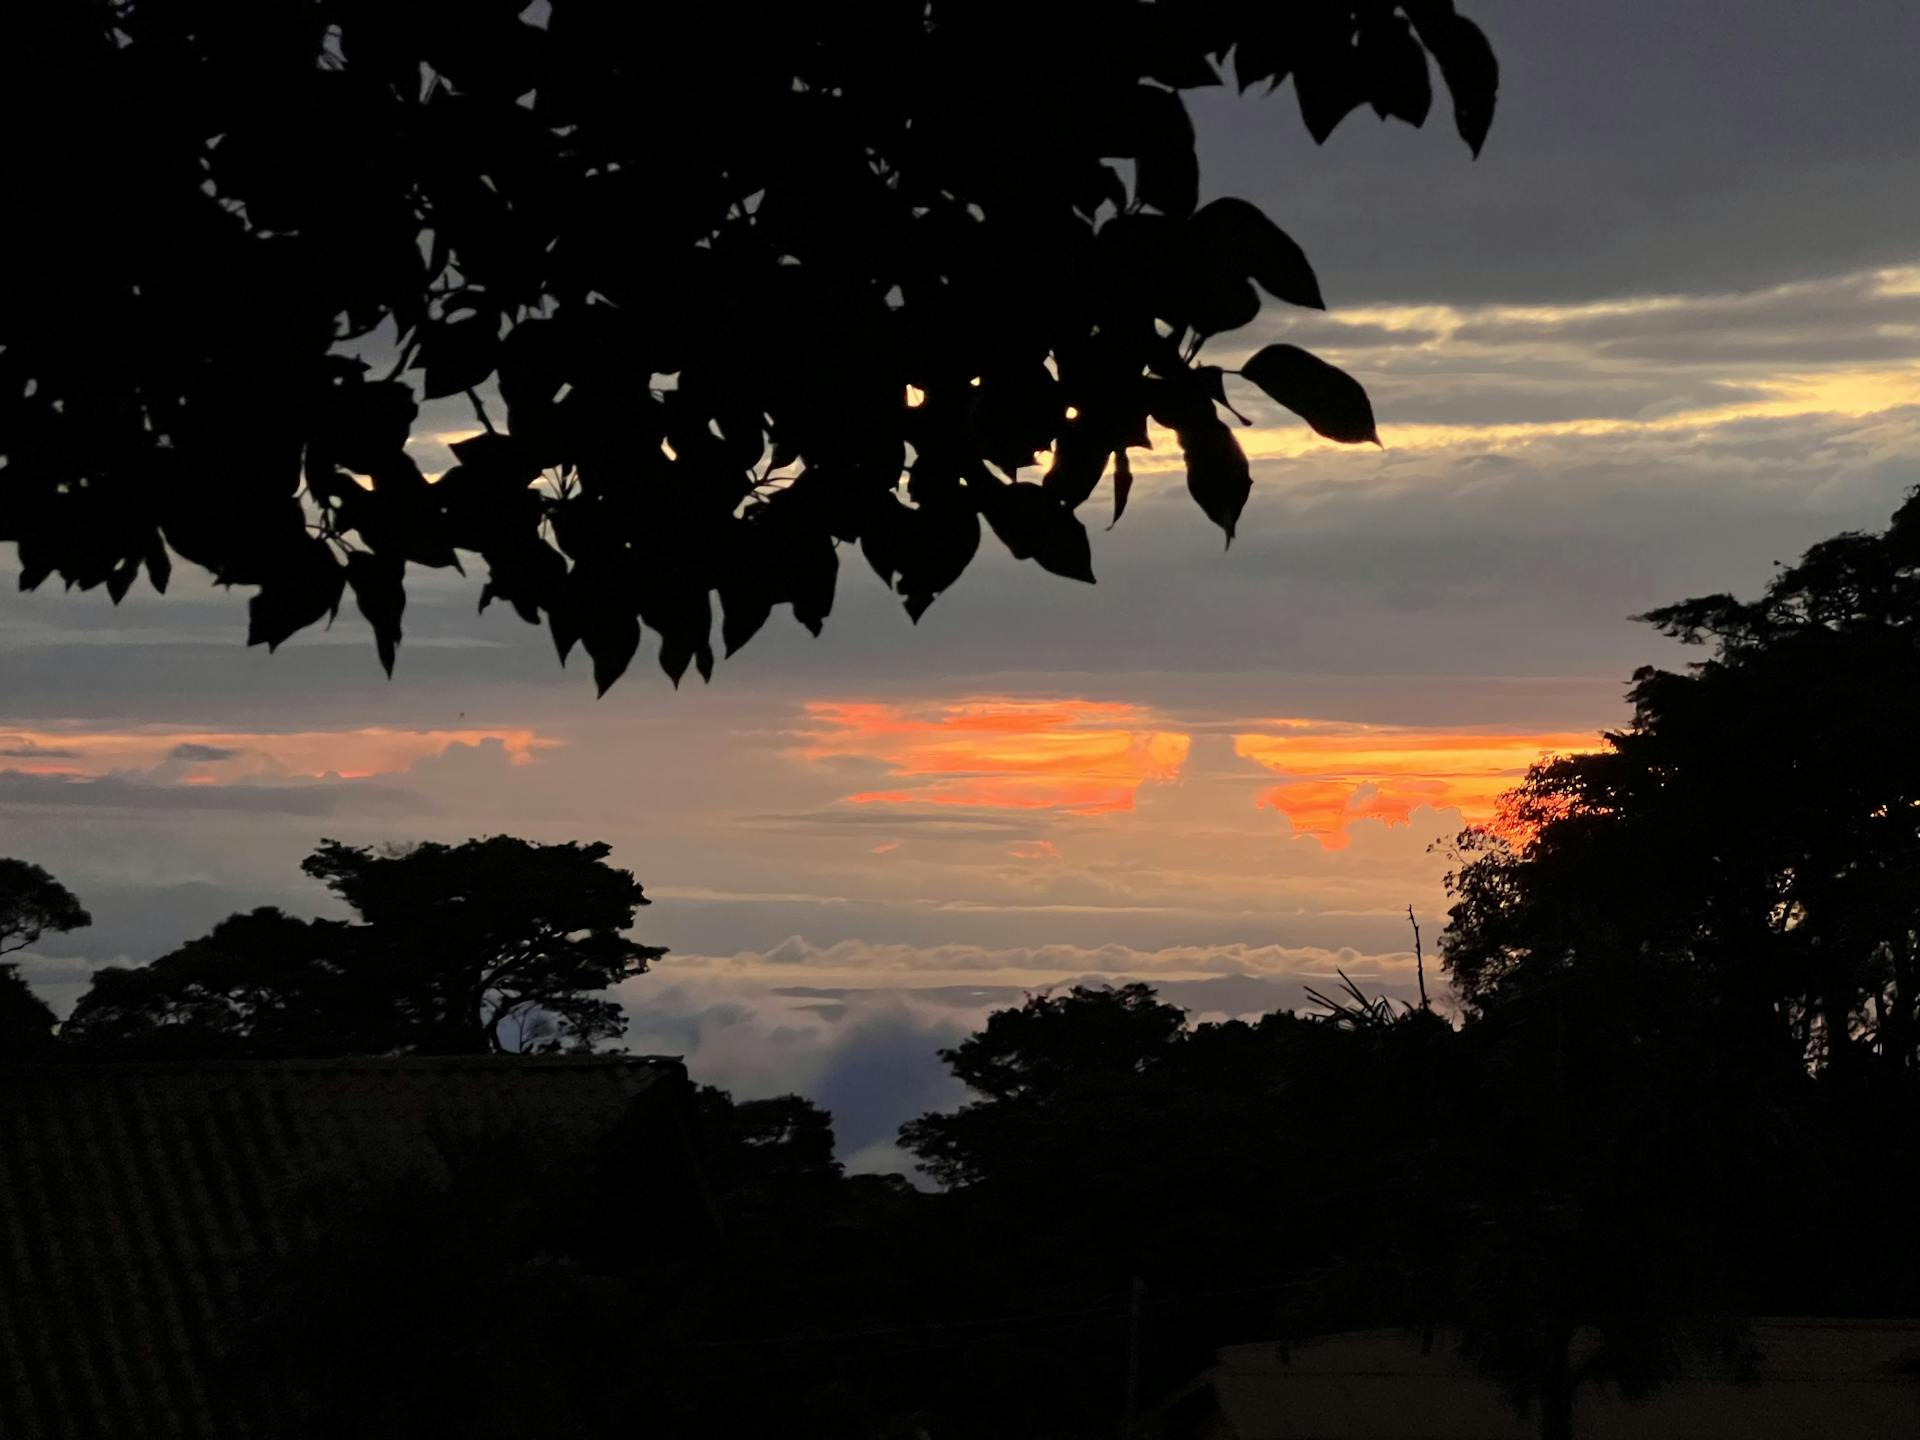 Cloudy sunset from Selina Monteverde